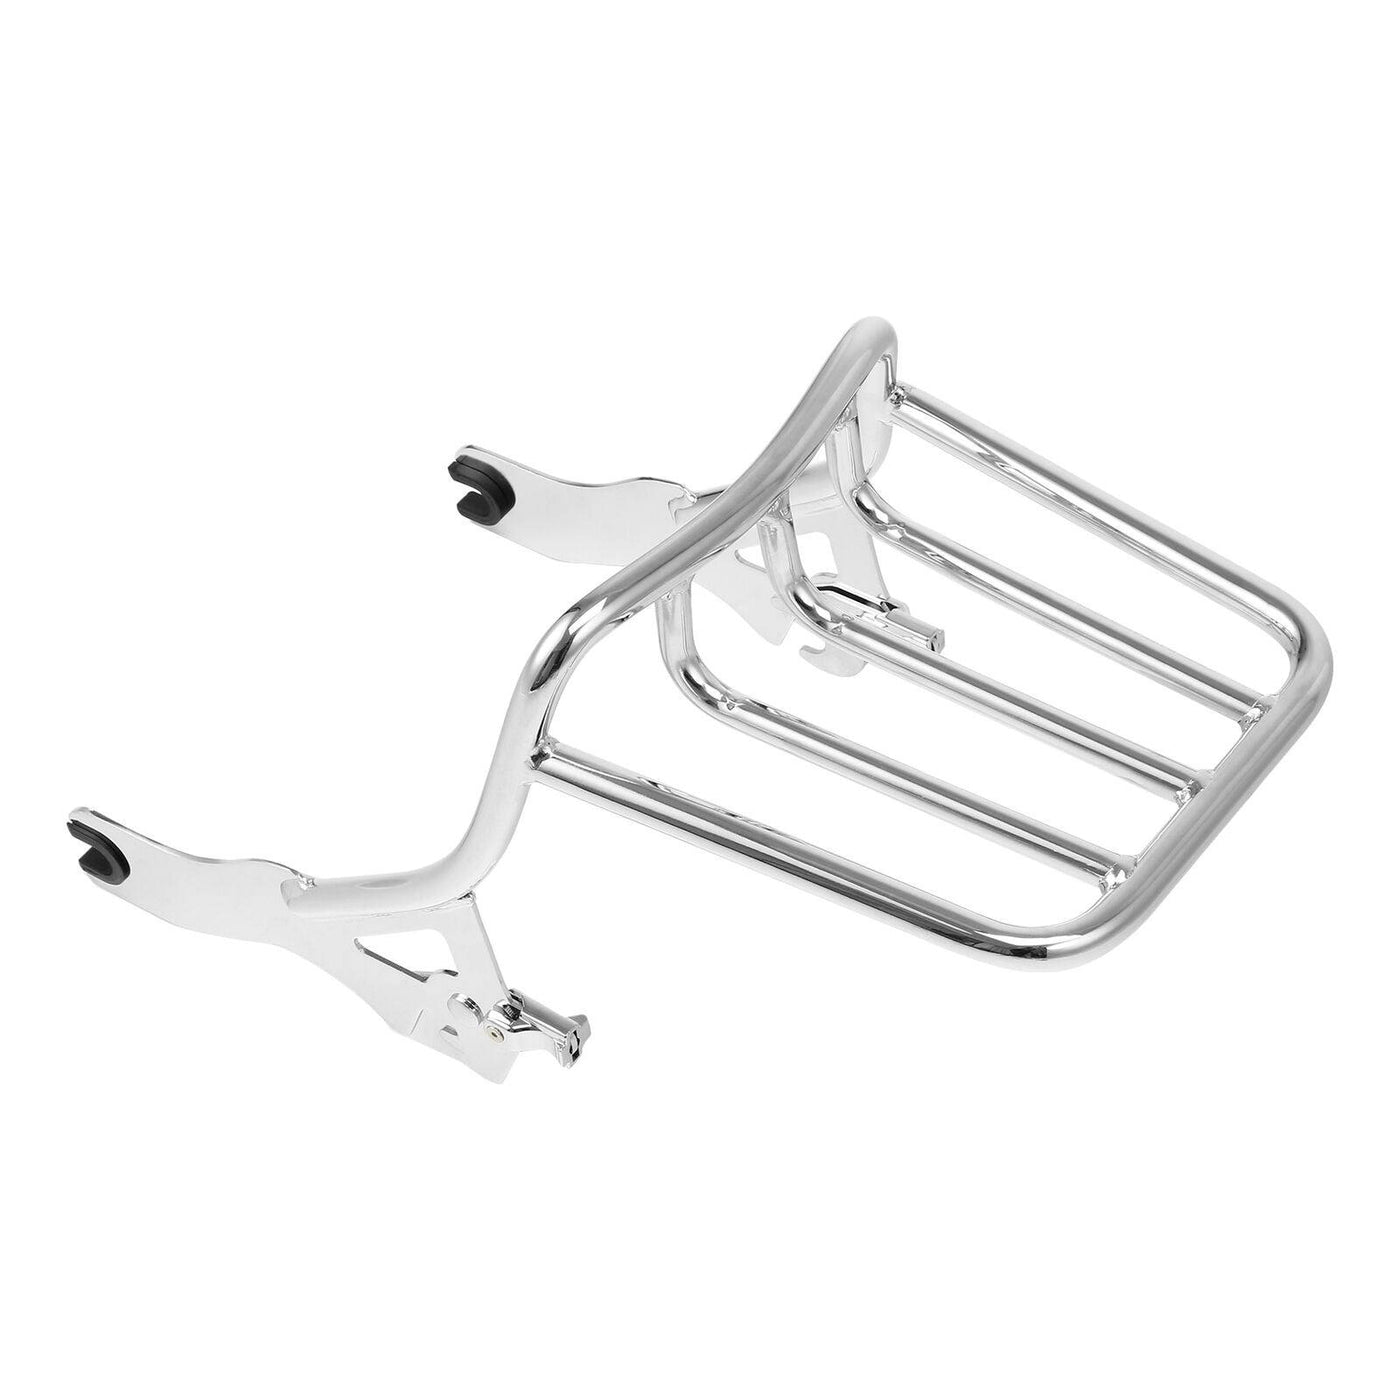 Sissybar Backrest Luggage Rack W/Docking Fit For Harley Softail Street Bob 18-22 - Moto Life Products